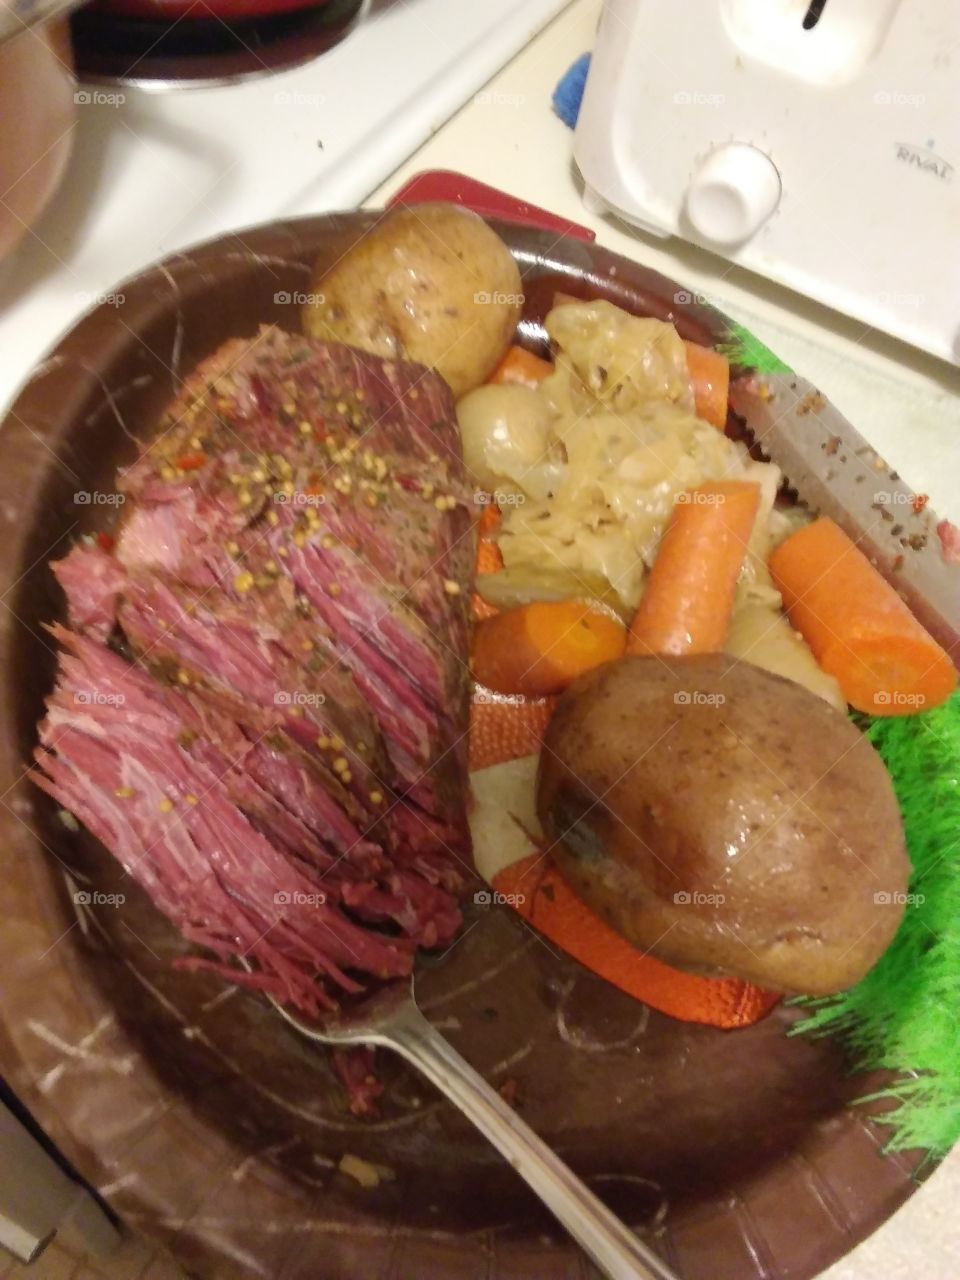 St Patricks day corned beef and cabbagetricks Day meal